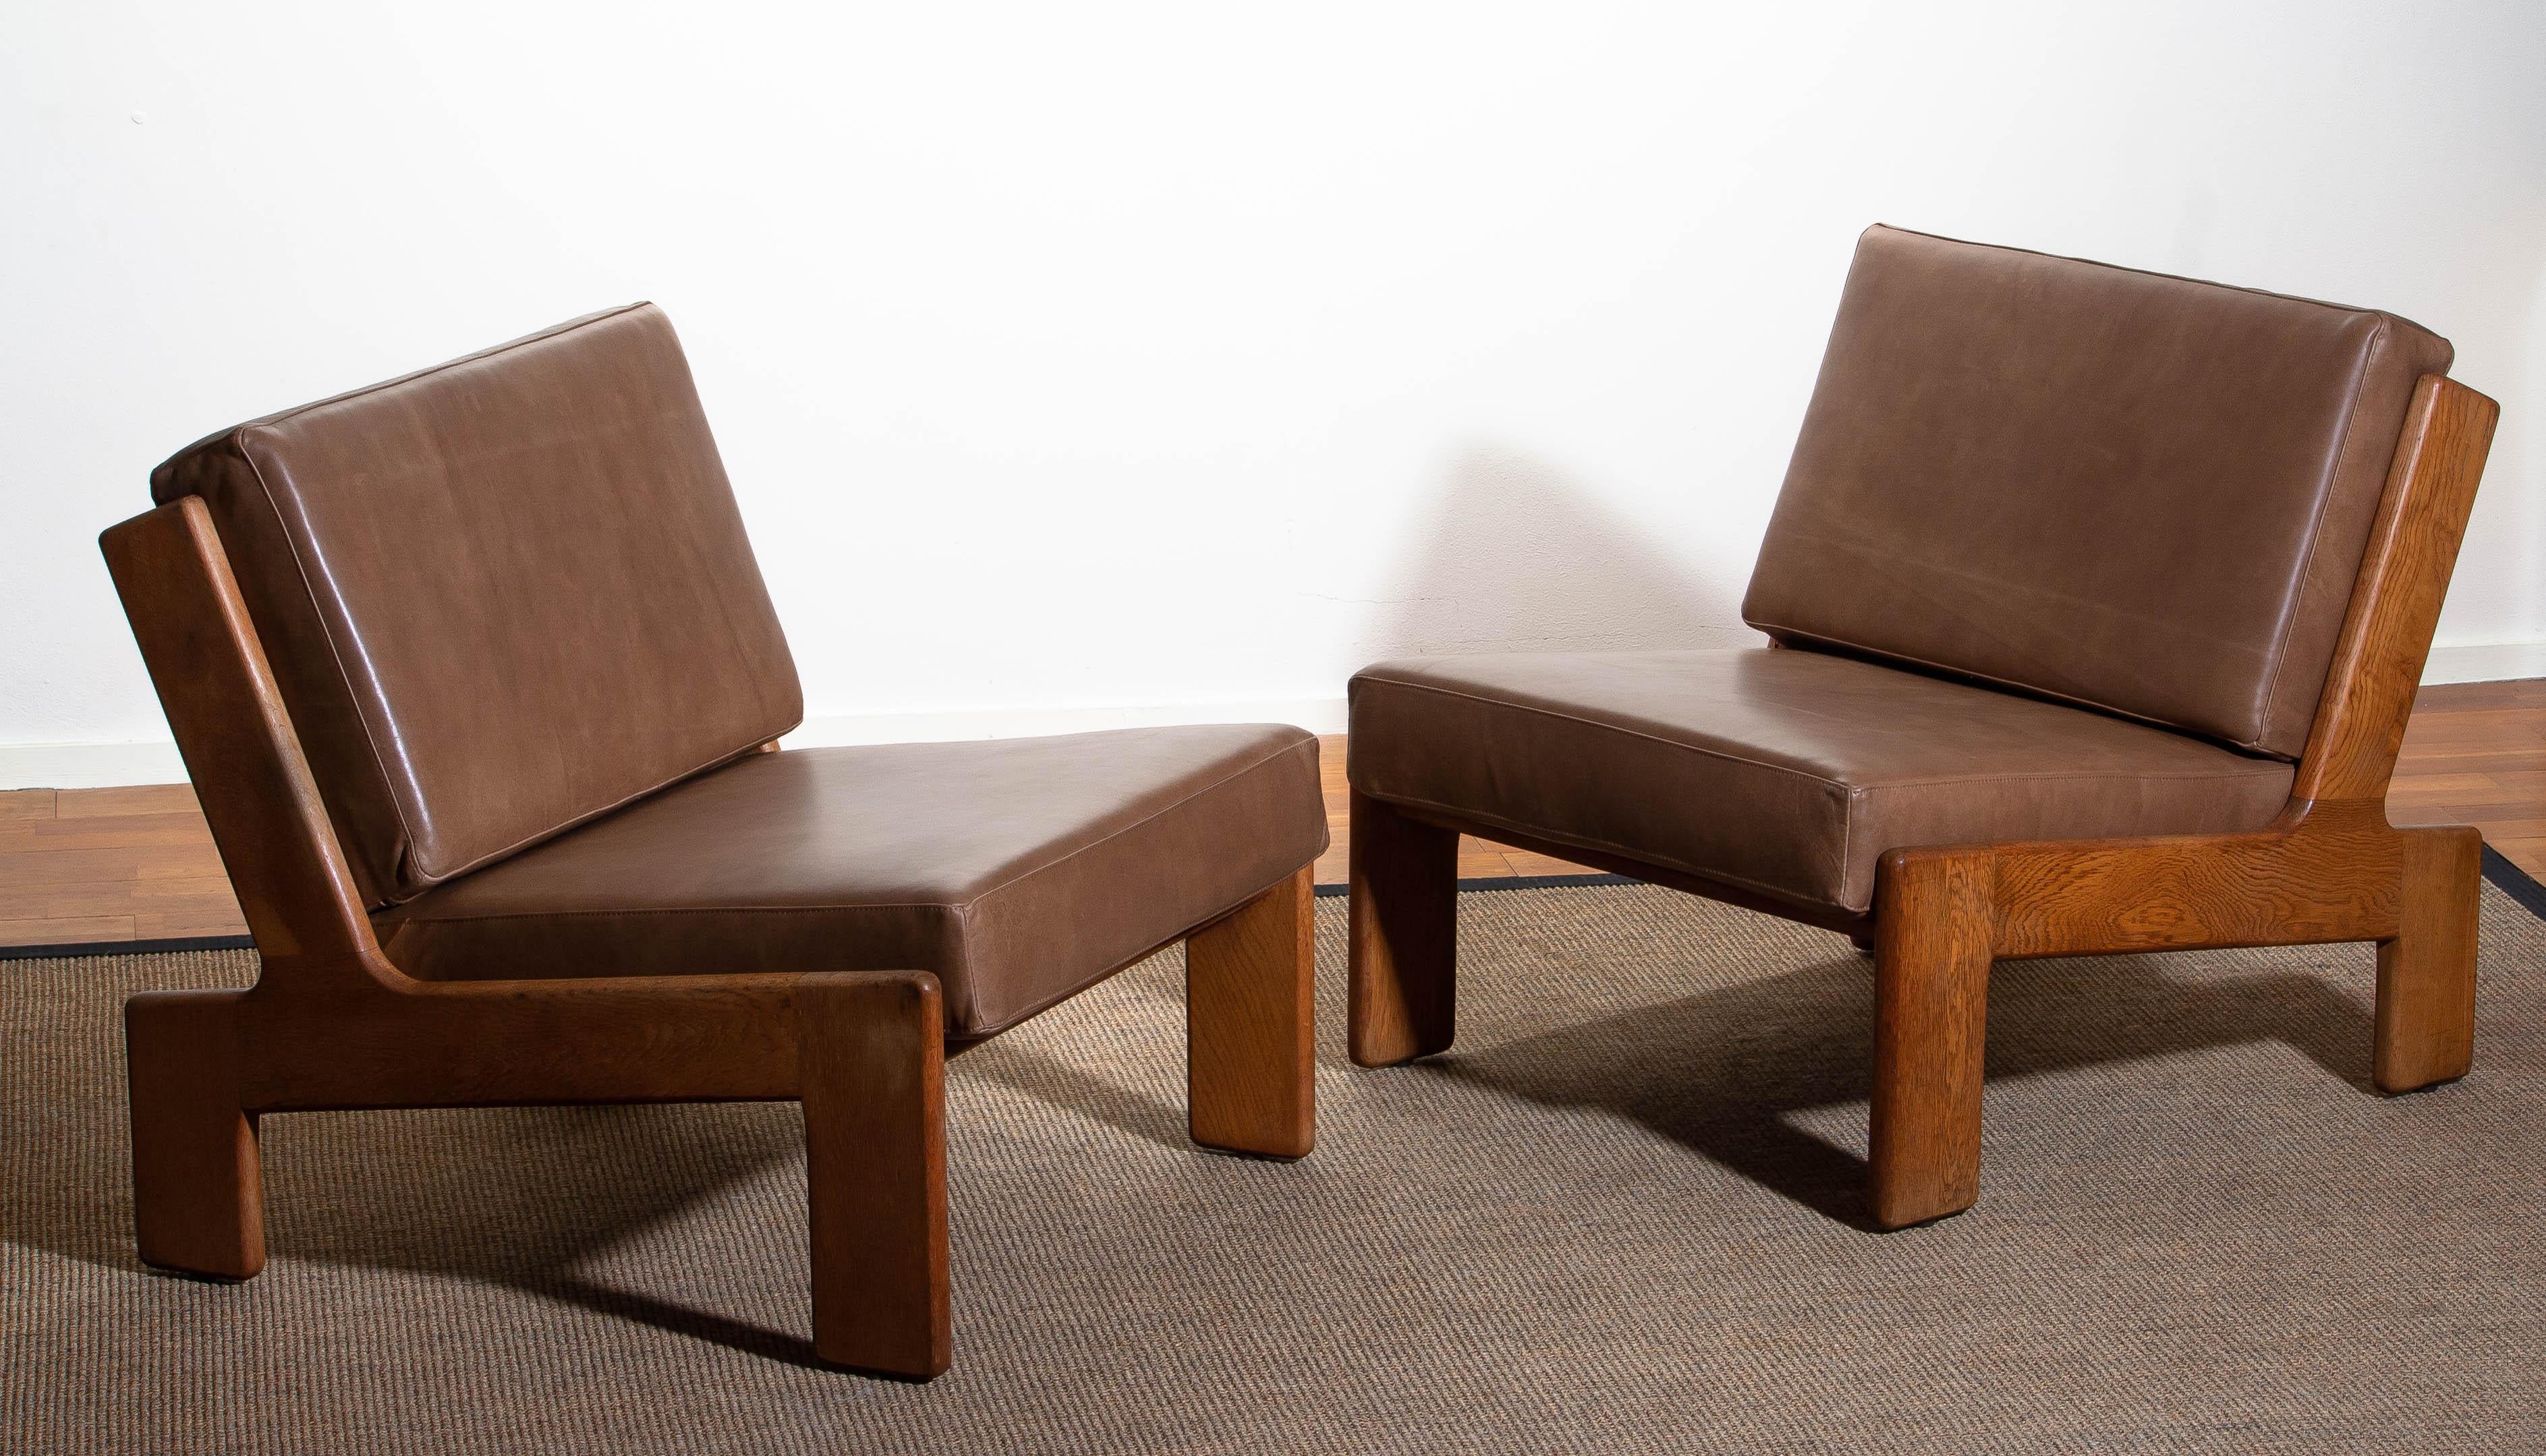 1960s, Pair of Oak and Leather Cubist Lounge Chairs by Esko Pajamies for Asko 4